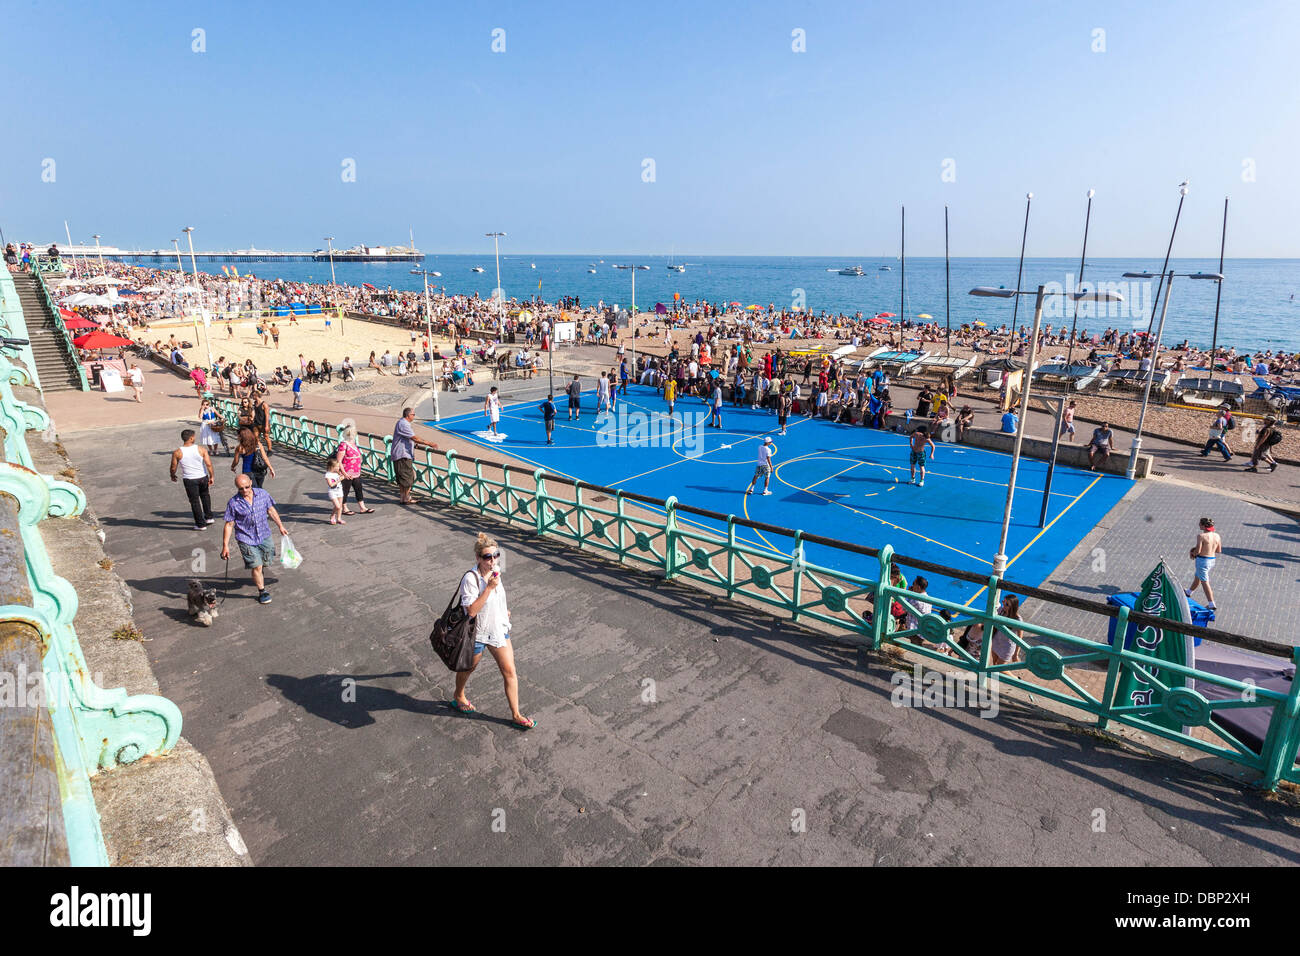 People climbing an access ramp next to a sports area at Brighton seafront, Brighton, England, UK. Stock Photo